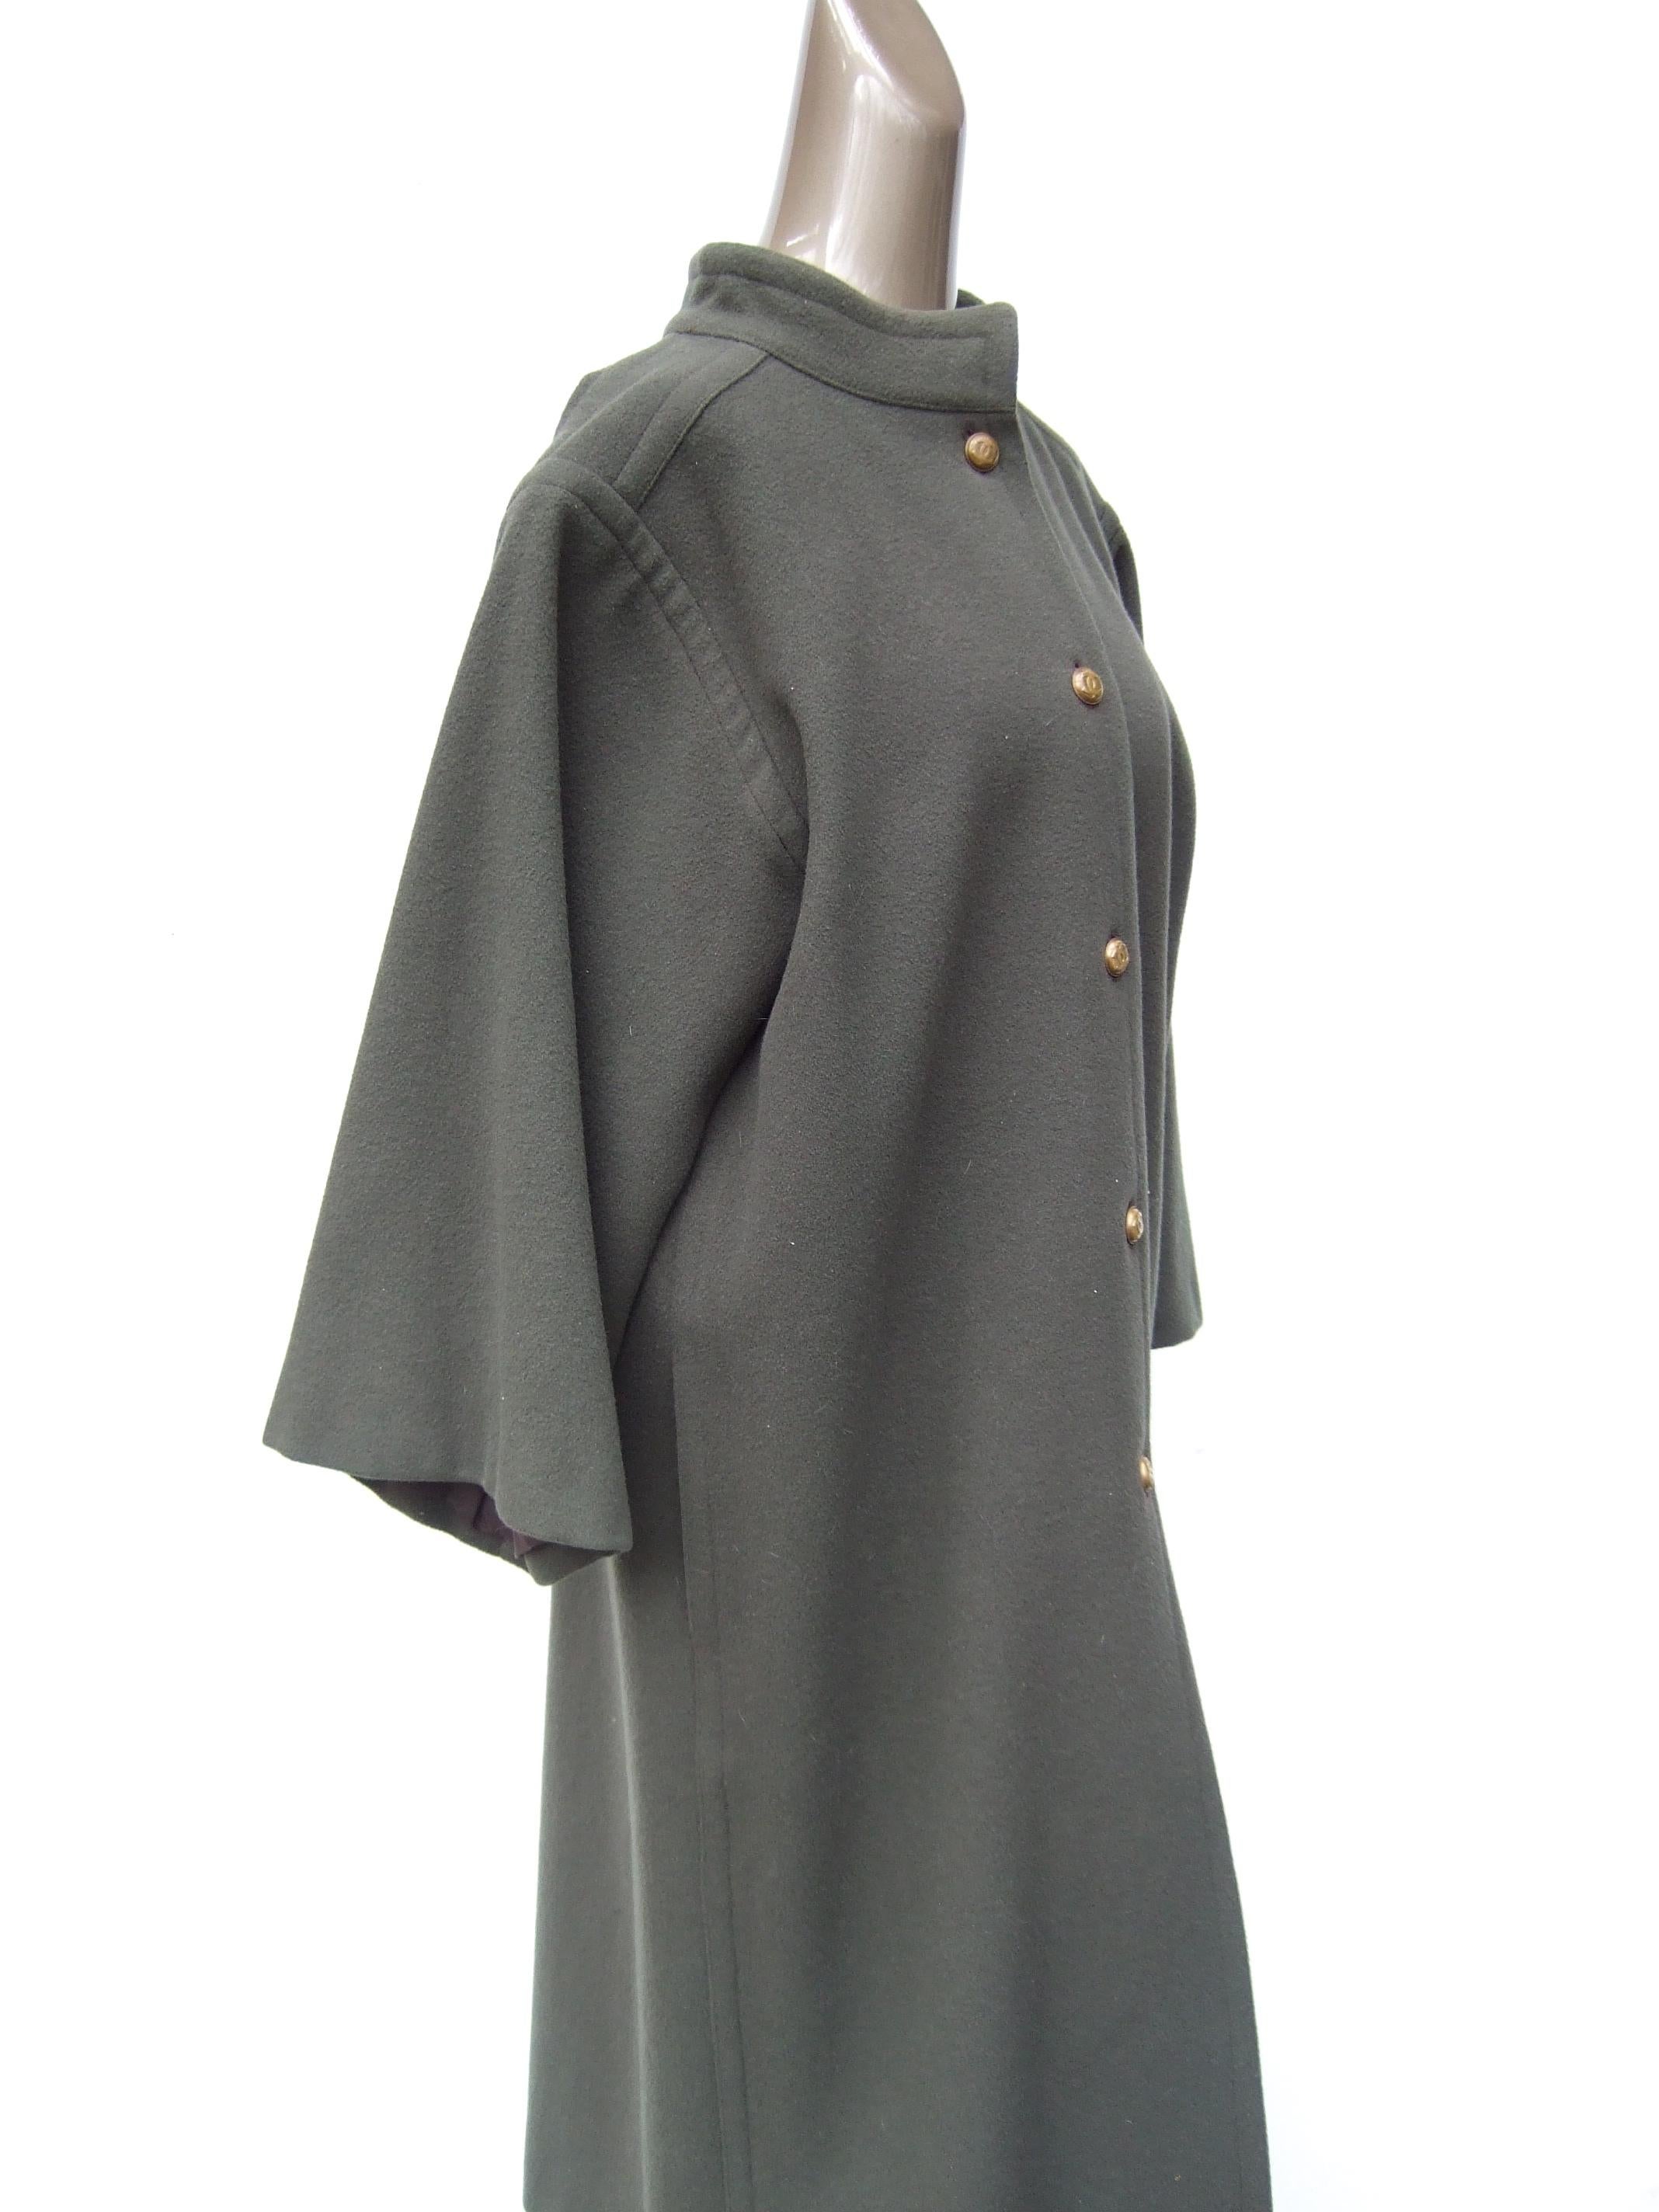 CHANEL Creations Muted Gray - Green Wool Coat with C.C. Buttons c 1980s In Good Condition For Sale In University City, MO